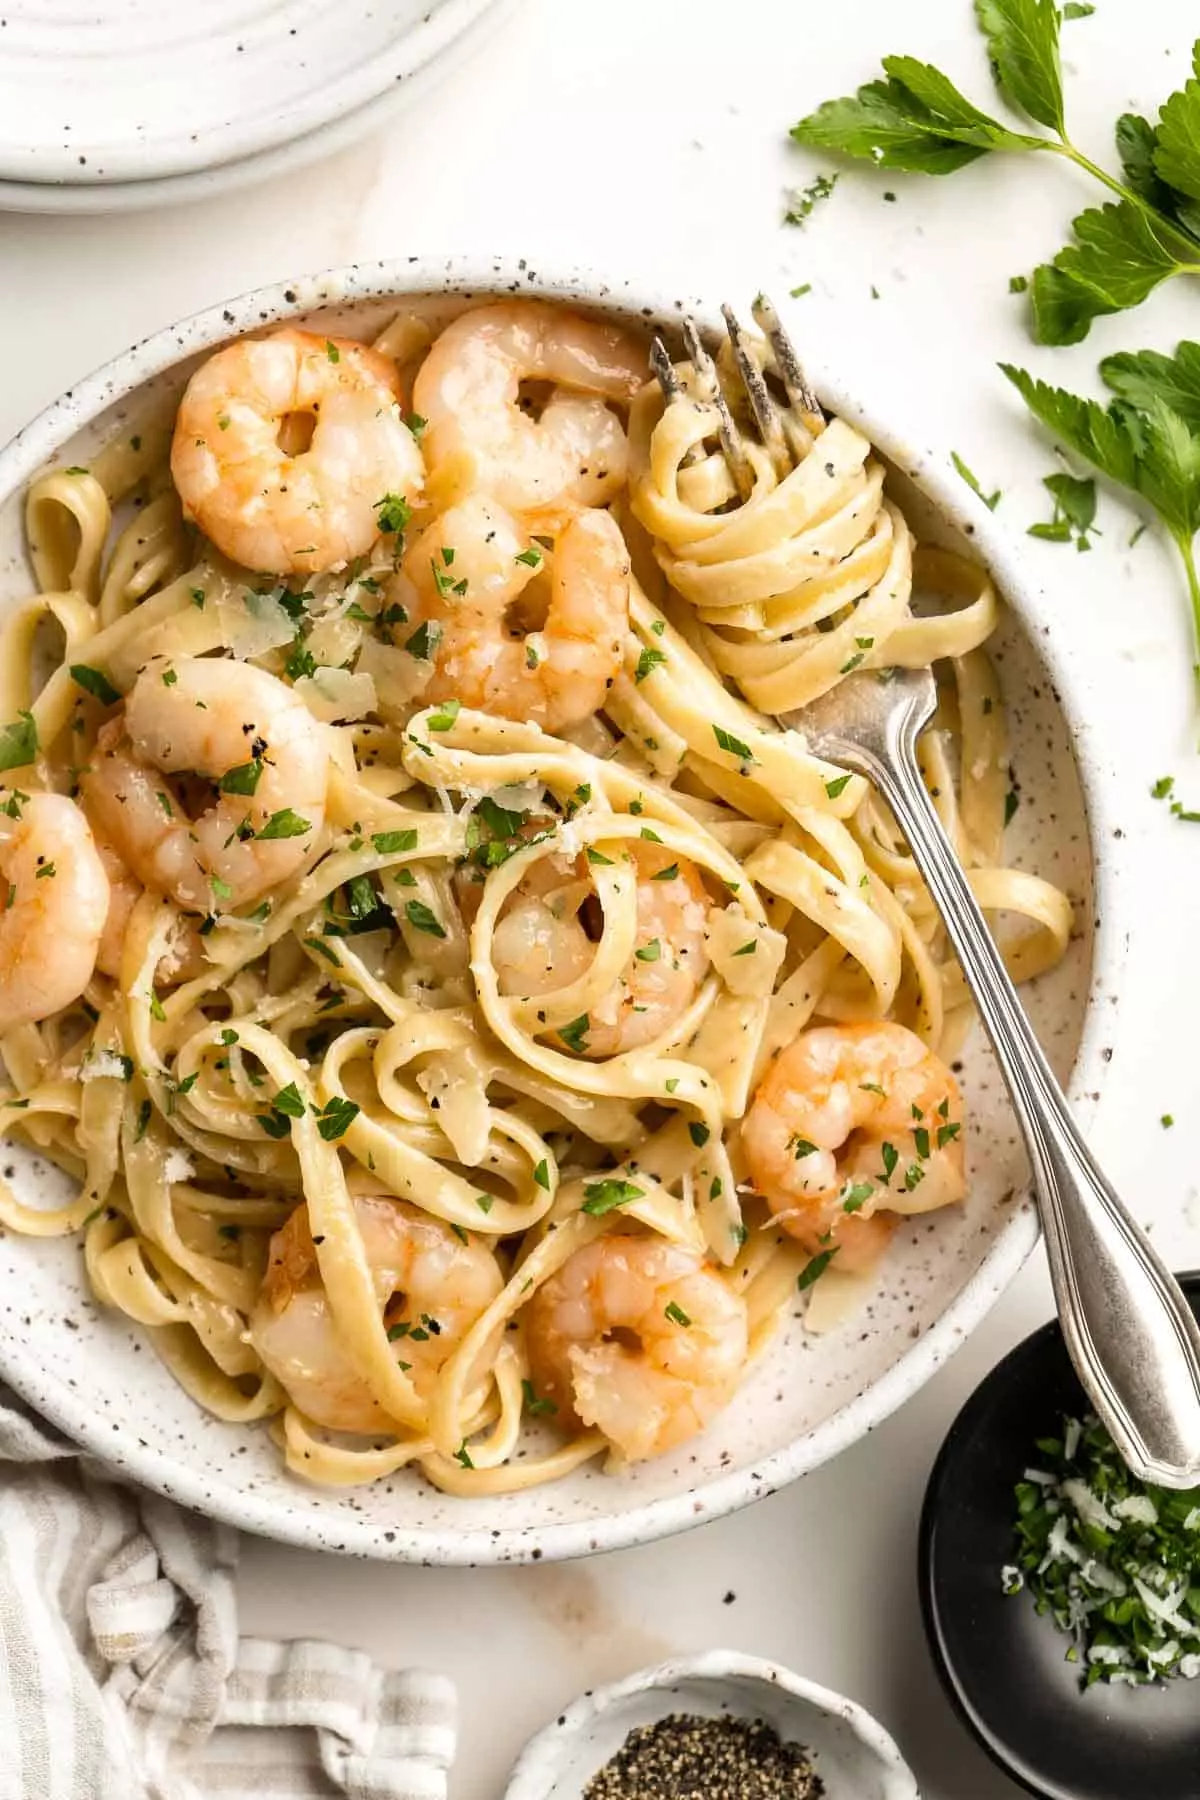 Shrimp Alfredo is creamy, garlicky, and delicious! This quick and easy, under 30-minute recipe is a go-to for busy nights and a year-round family favorite.